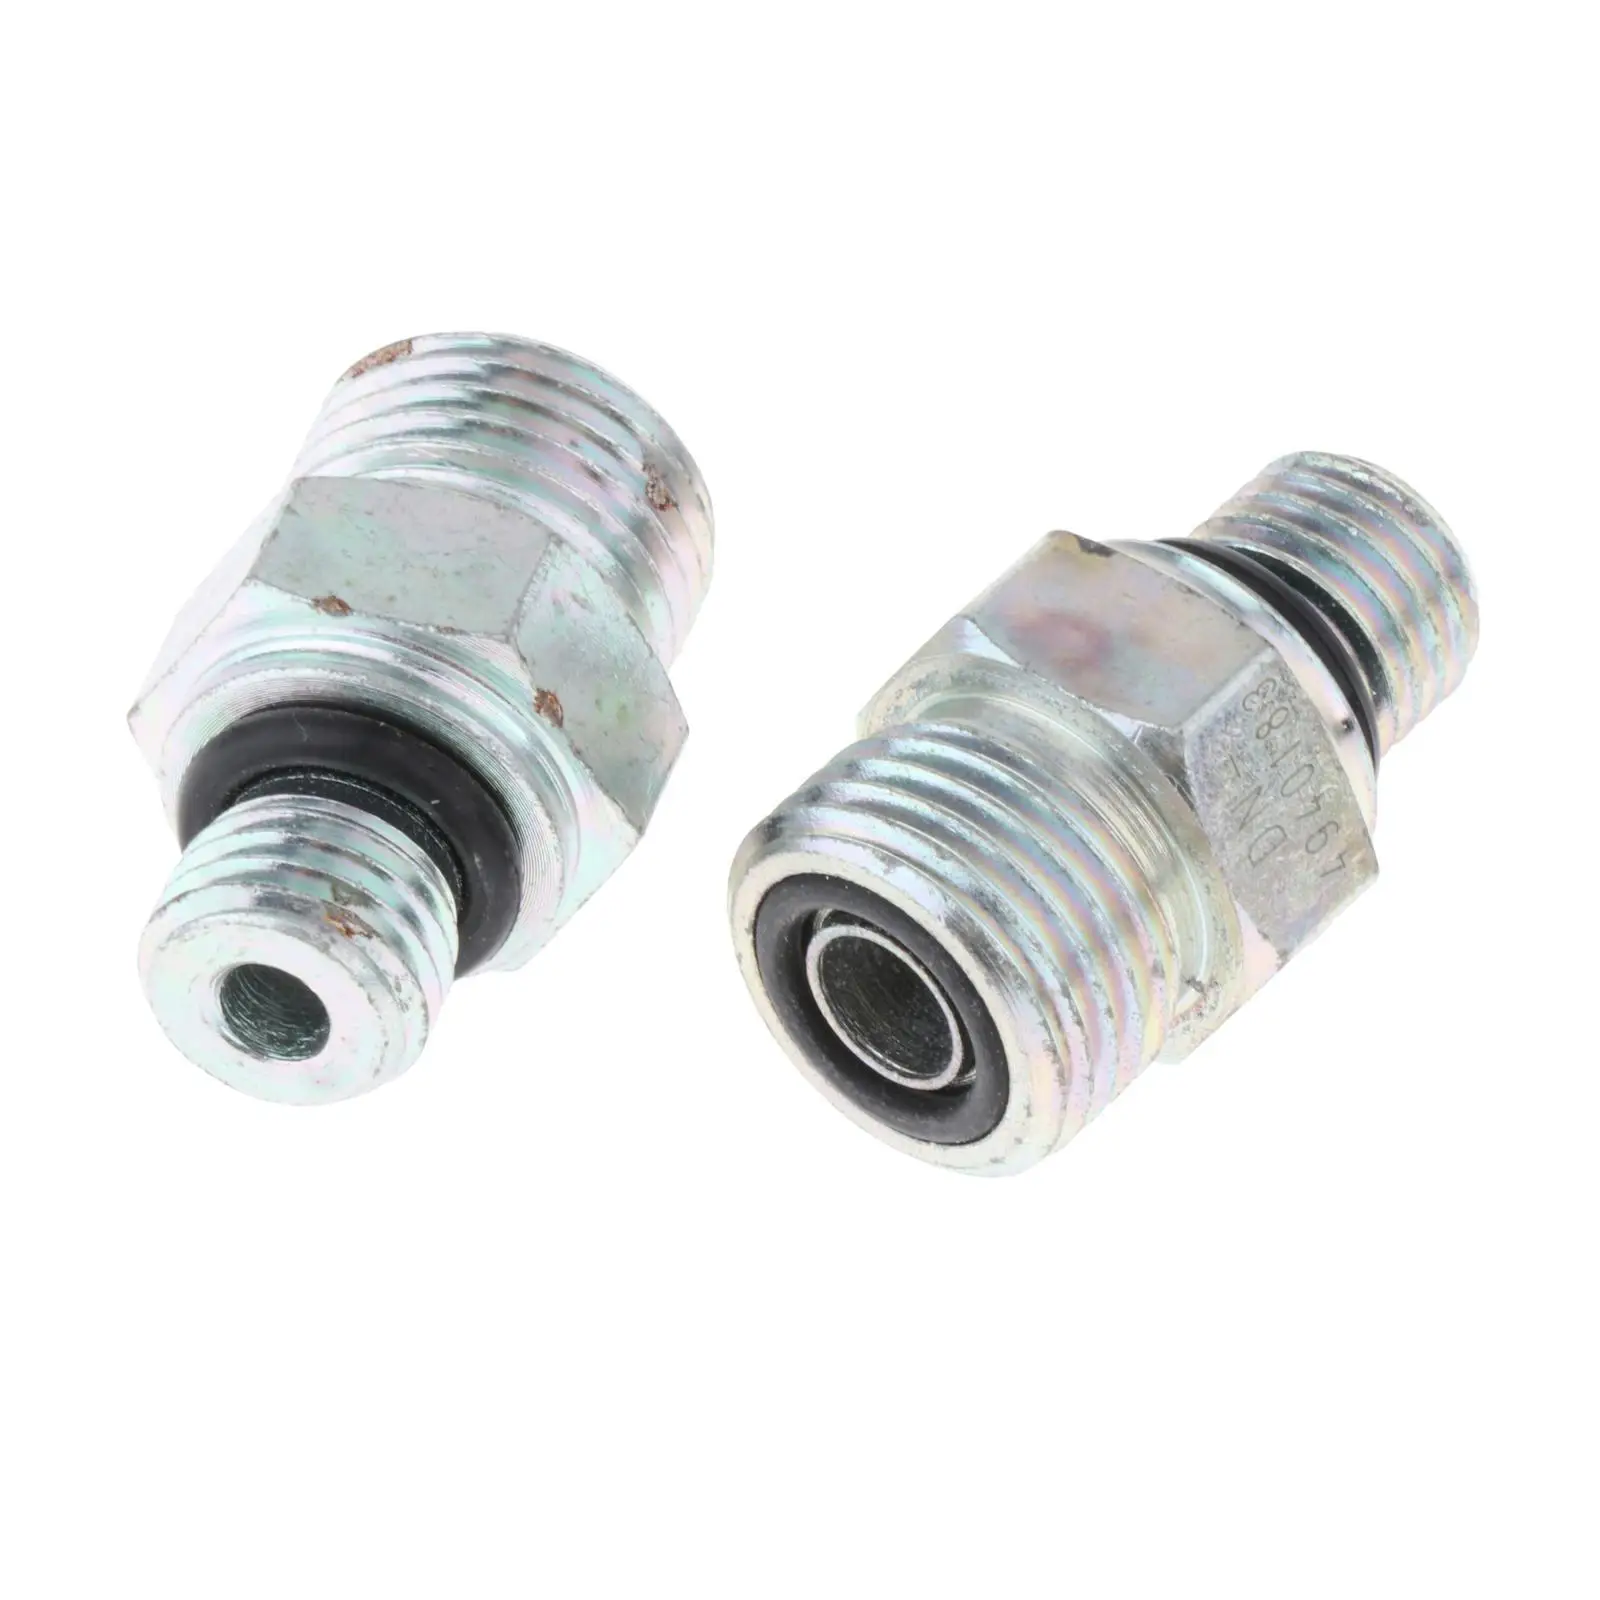 2Pcs Replacement turbo oil feed Line Parts Accessory Metal Turbo Oil feed Line Fitting for Car Automotive Vehicle Engine Parts